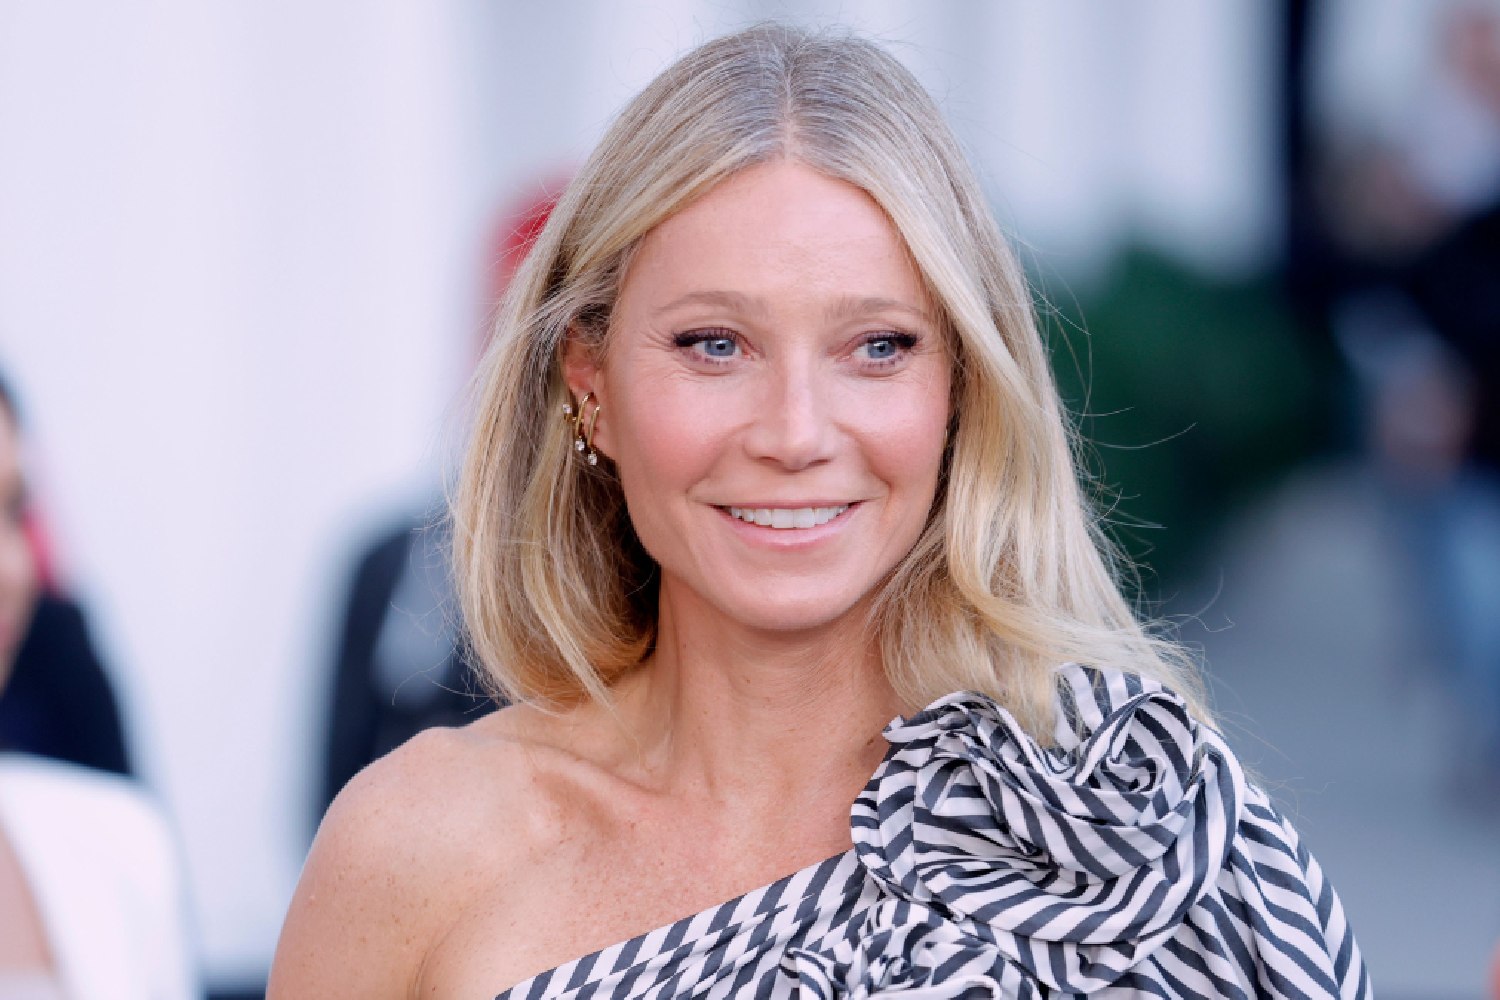 Gwyneth Paltrow’s Montecito Guesthouse Is Up For Rent On Airbnb